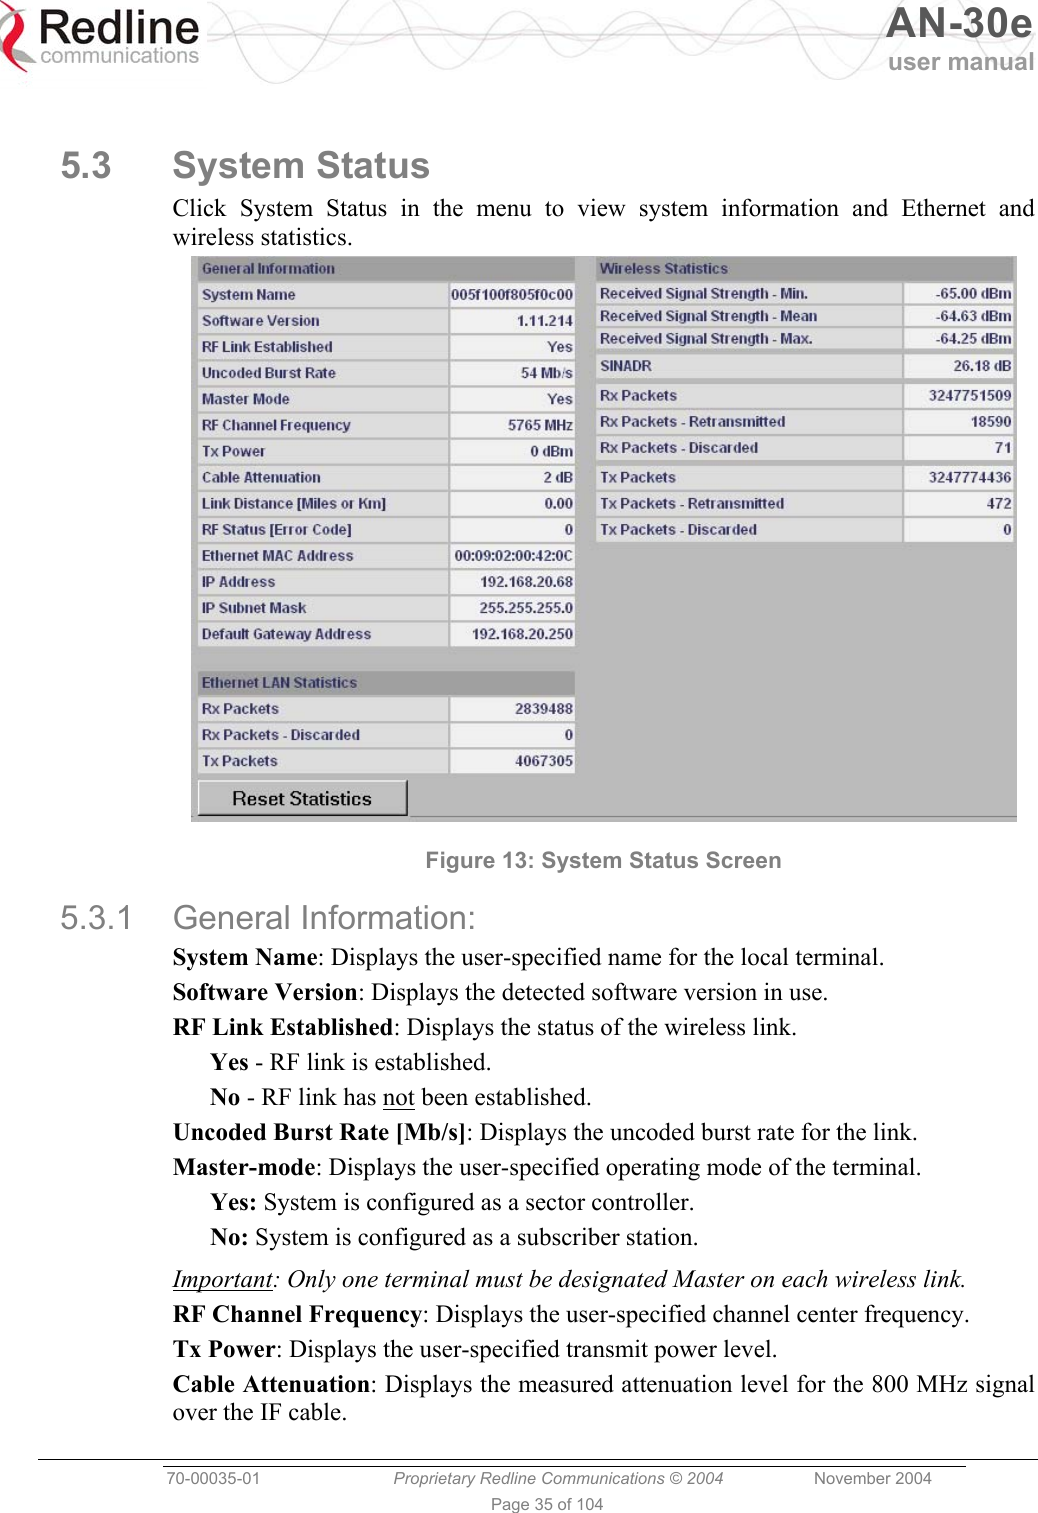   AN-30e user manual  70-00035-01  Proprietary Redline Communications © 2004 November 2004   Page 35 of 104  5.3 System Status Click System Status in the menu to view system information and Ethernet and wireless statistics.  Figure 13: System Status Screen 5.3.1 General Information: System Name: Displays the user-specified name for the local terminal. Software Version: Displays the detected software version in use. RF Link Established: Displays the status of the wireless link. Yes - RF link is established. No - RF link has not been established. Uncoded Burst Rate [Mb/s]: Displays the uncoded burst rate for the link.  Master-mode: Displays the user-specified operating mode of the terminal. Yes: System is configured as a sector controller. No: System is configured as a subscriber station. Important: Only one terminal must be designated Master on each wireless link. RF Channel Frequency: Displays the user-specified channel center frequency. Tx Power: Displays the user-specified transmit power level. Cable Attenuation: Displays the measured attenuation level for the 800 MHz signal over the IF cable. 